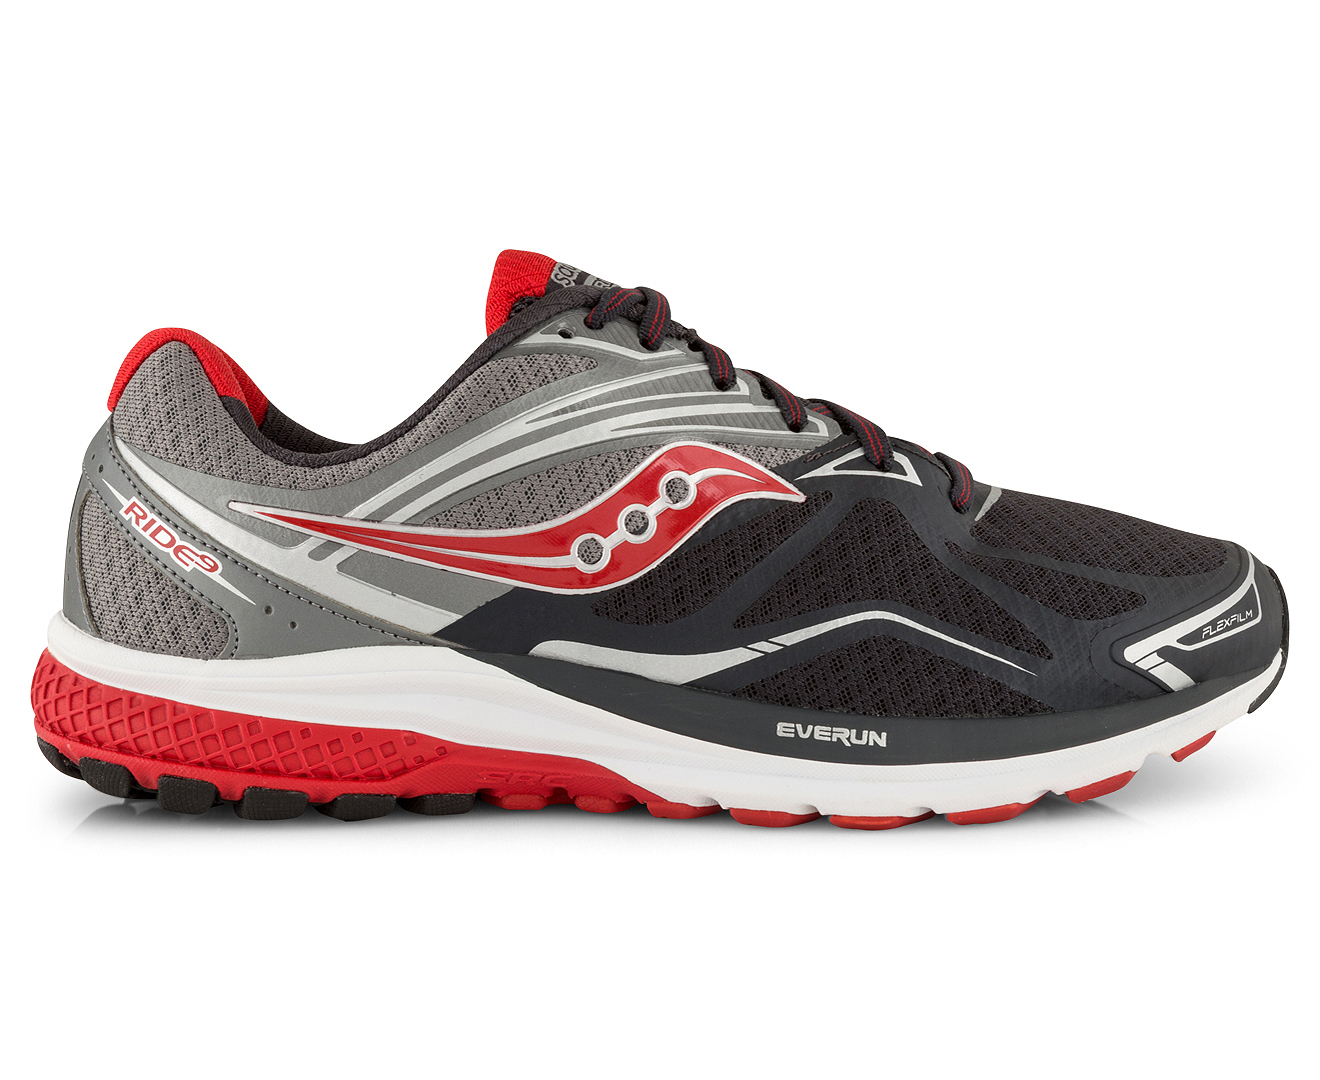 Saucony Men's Ride 9 2E Wide Fit Shoe - Grey/Charcoal/Red | Great daily ...